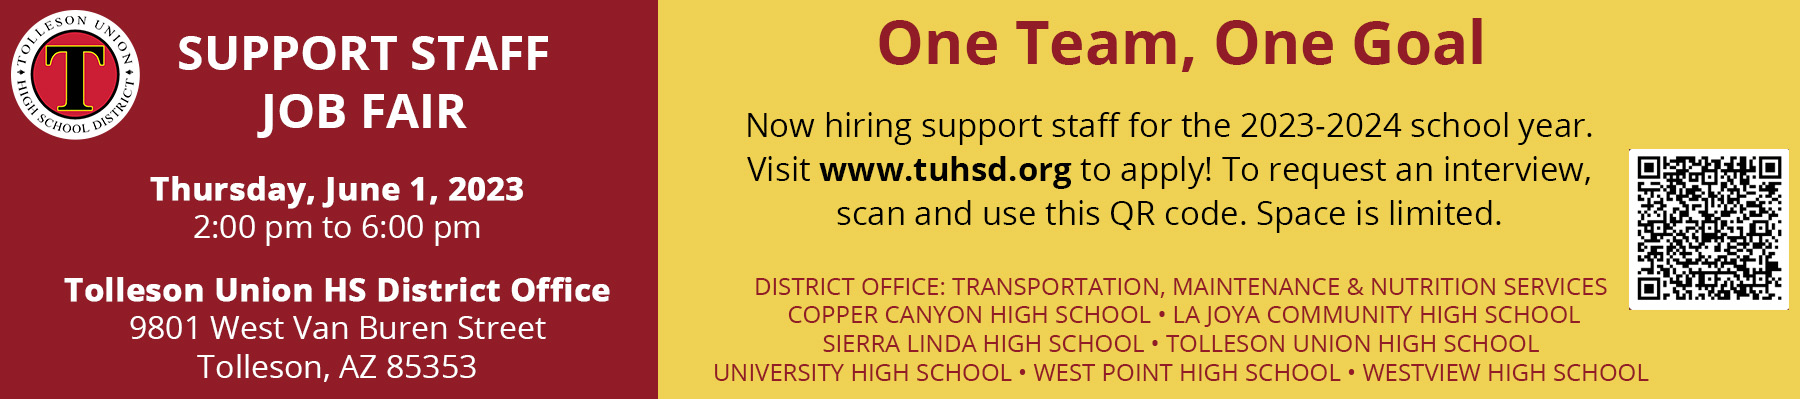 Support Staff Job fair Thursday, June 1, 2023 2:00 pm to 6:00 pm. Tolleson Union HS District Office, 9801 West Van Buren Street, Tolleson, AZ 85353. Now hiring support staff for the 2023-2024 school year. Visit www.tuhsd.org to apply! To request an interview, scan and use this QR code. Space is limited.